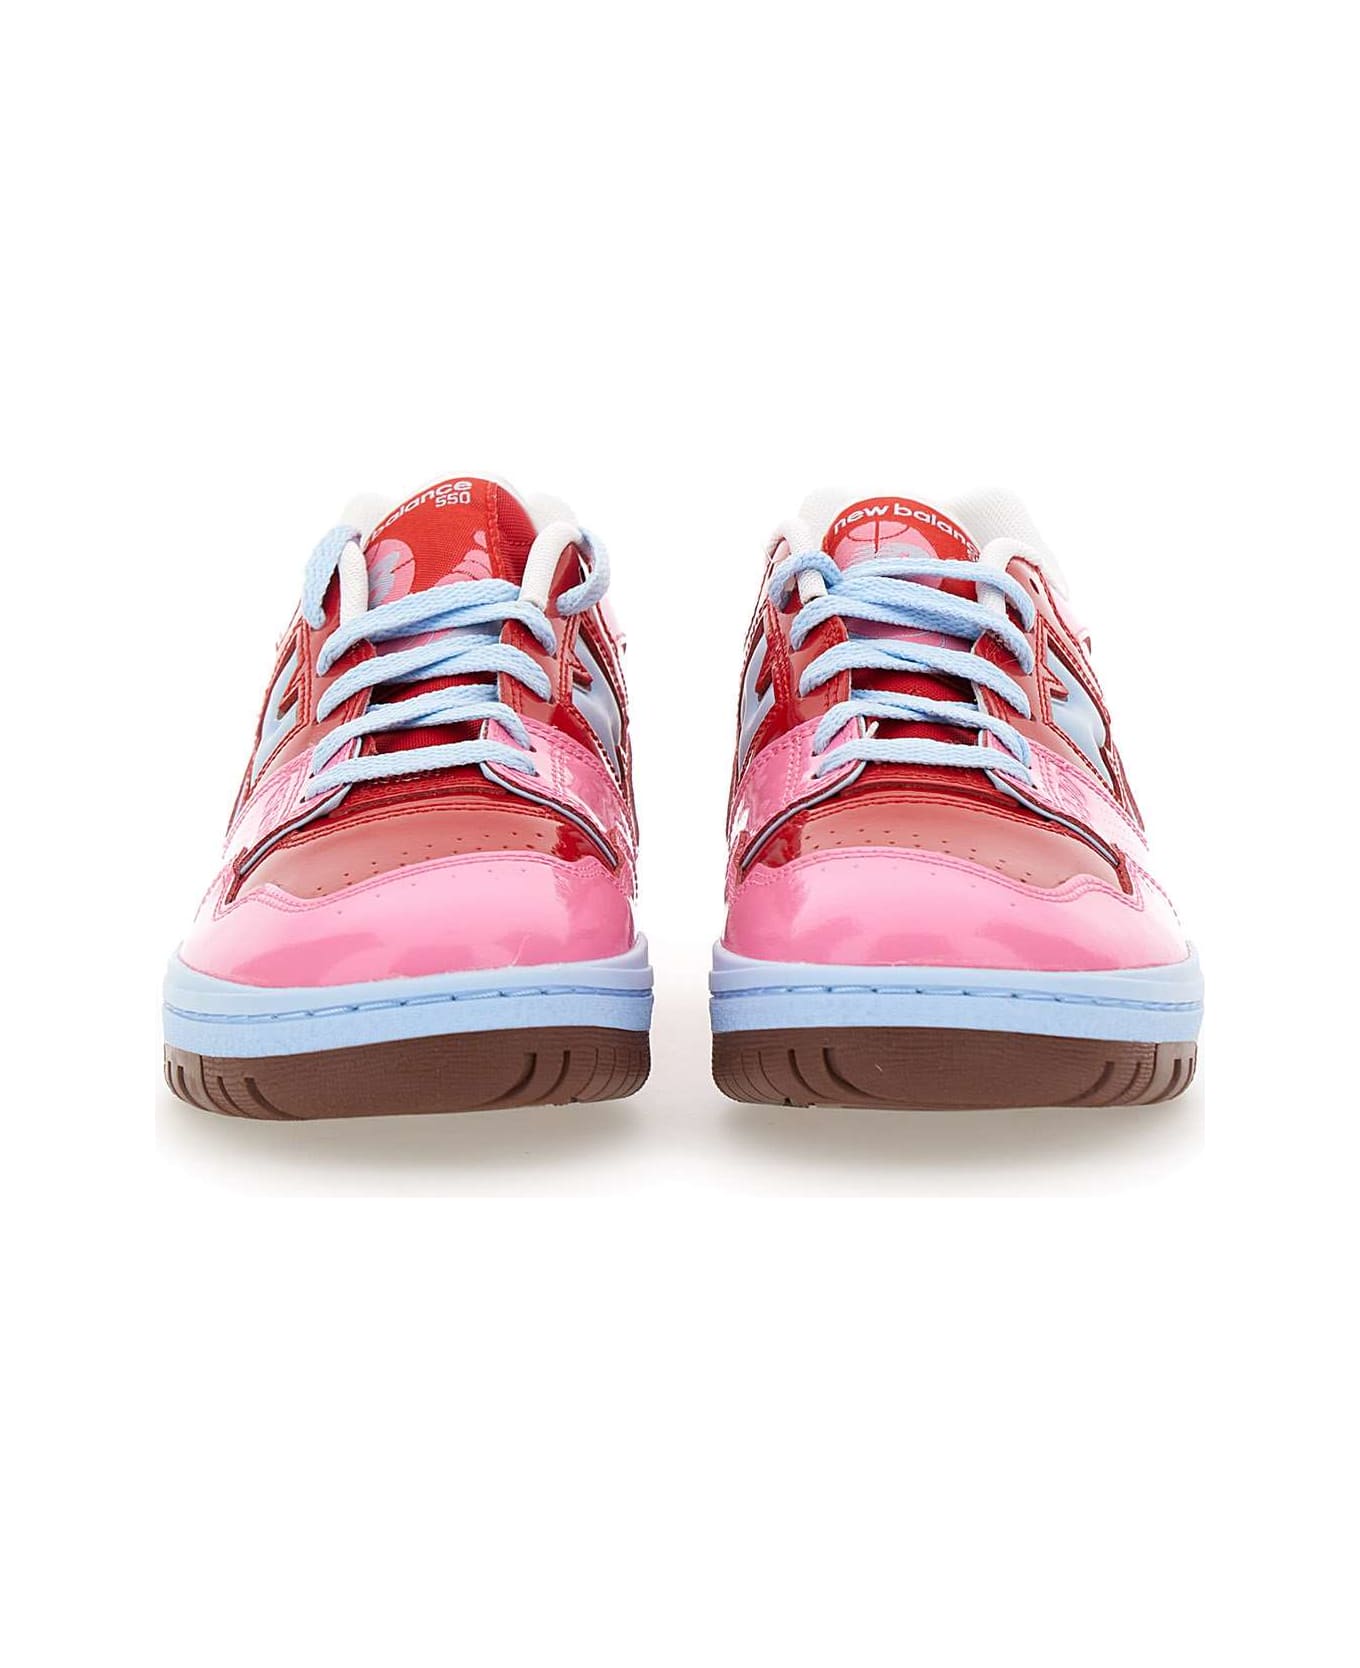 New Balance "bb550" Sneakers - Red-pink